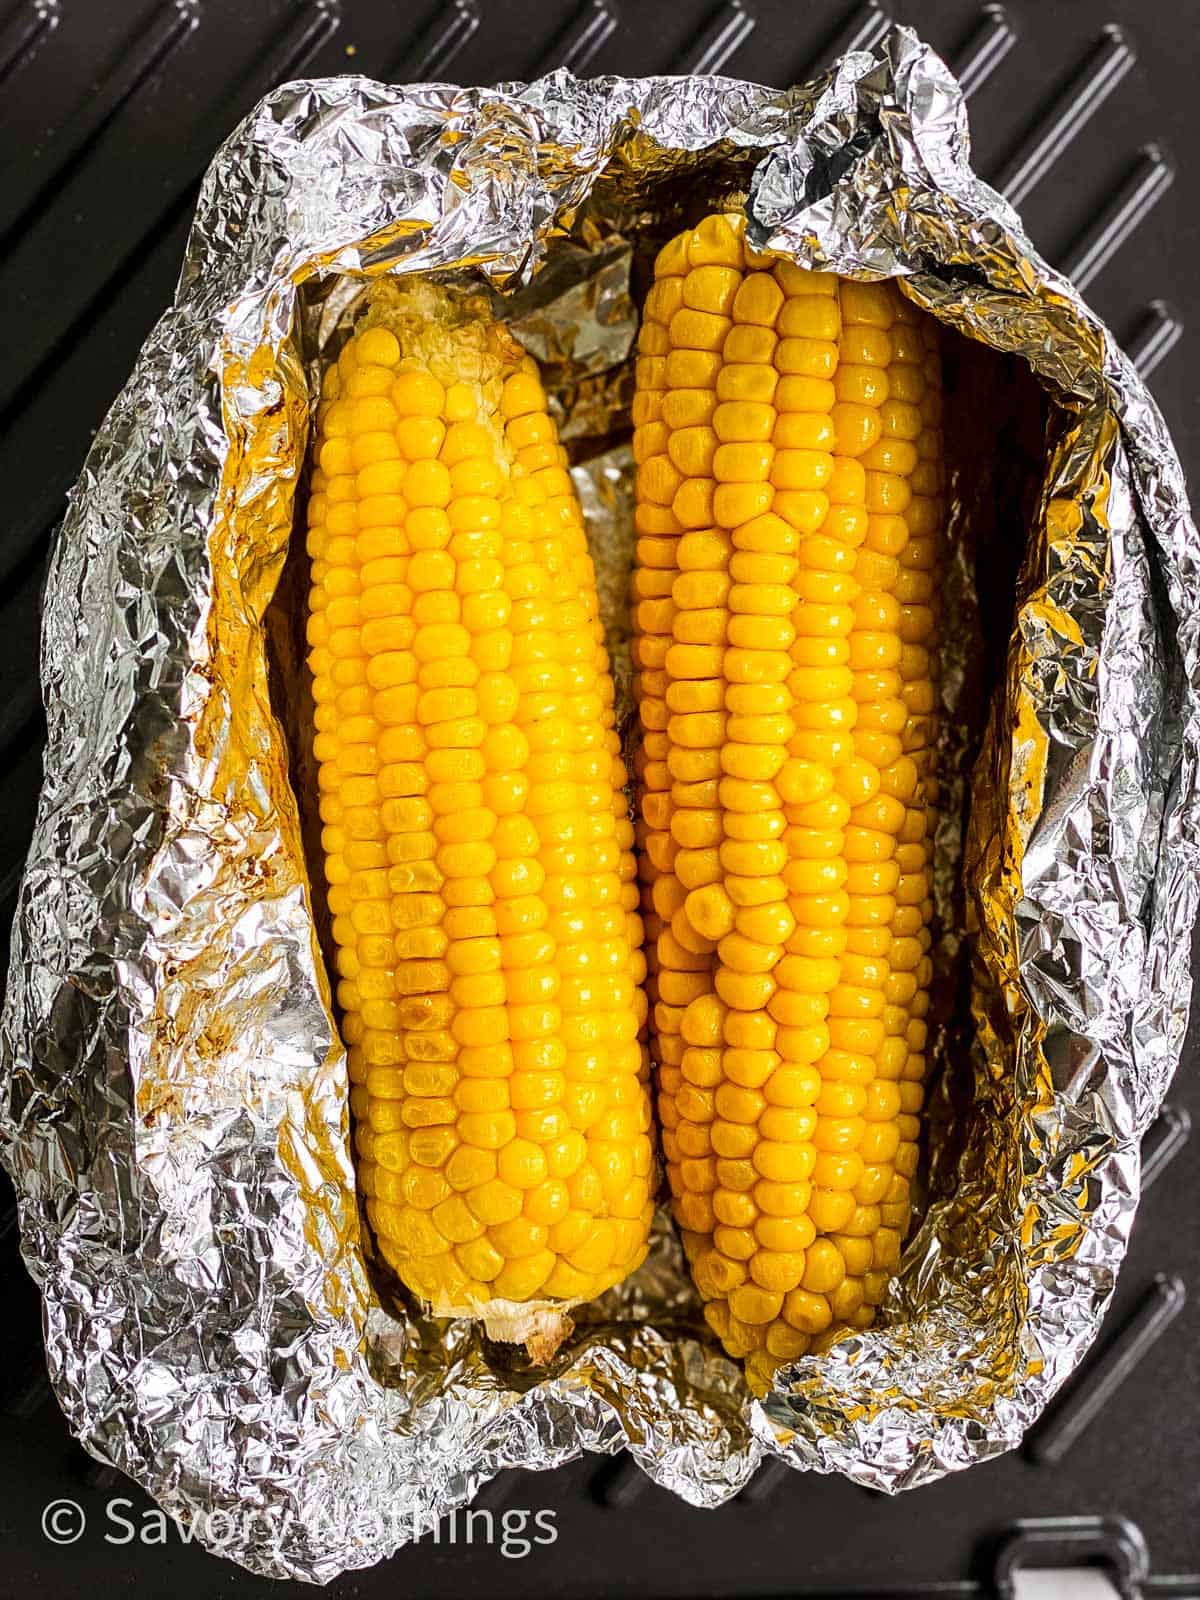 Grilled Corn on the Cob in Foil Recipe | Savory Nothings